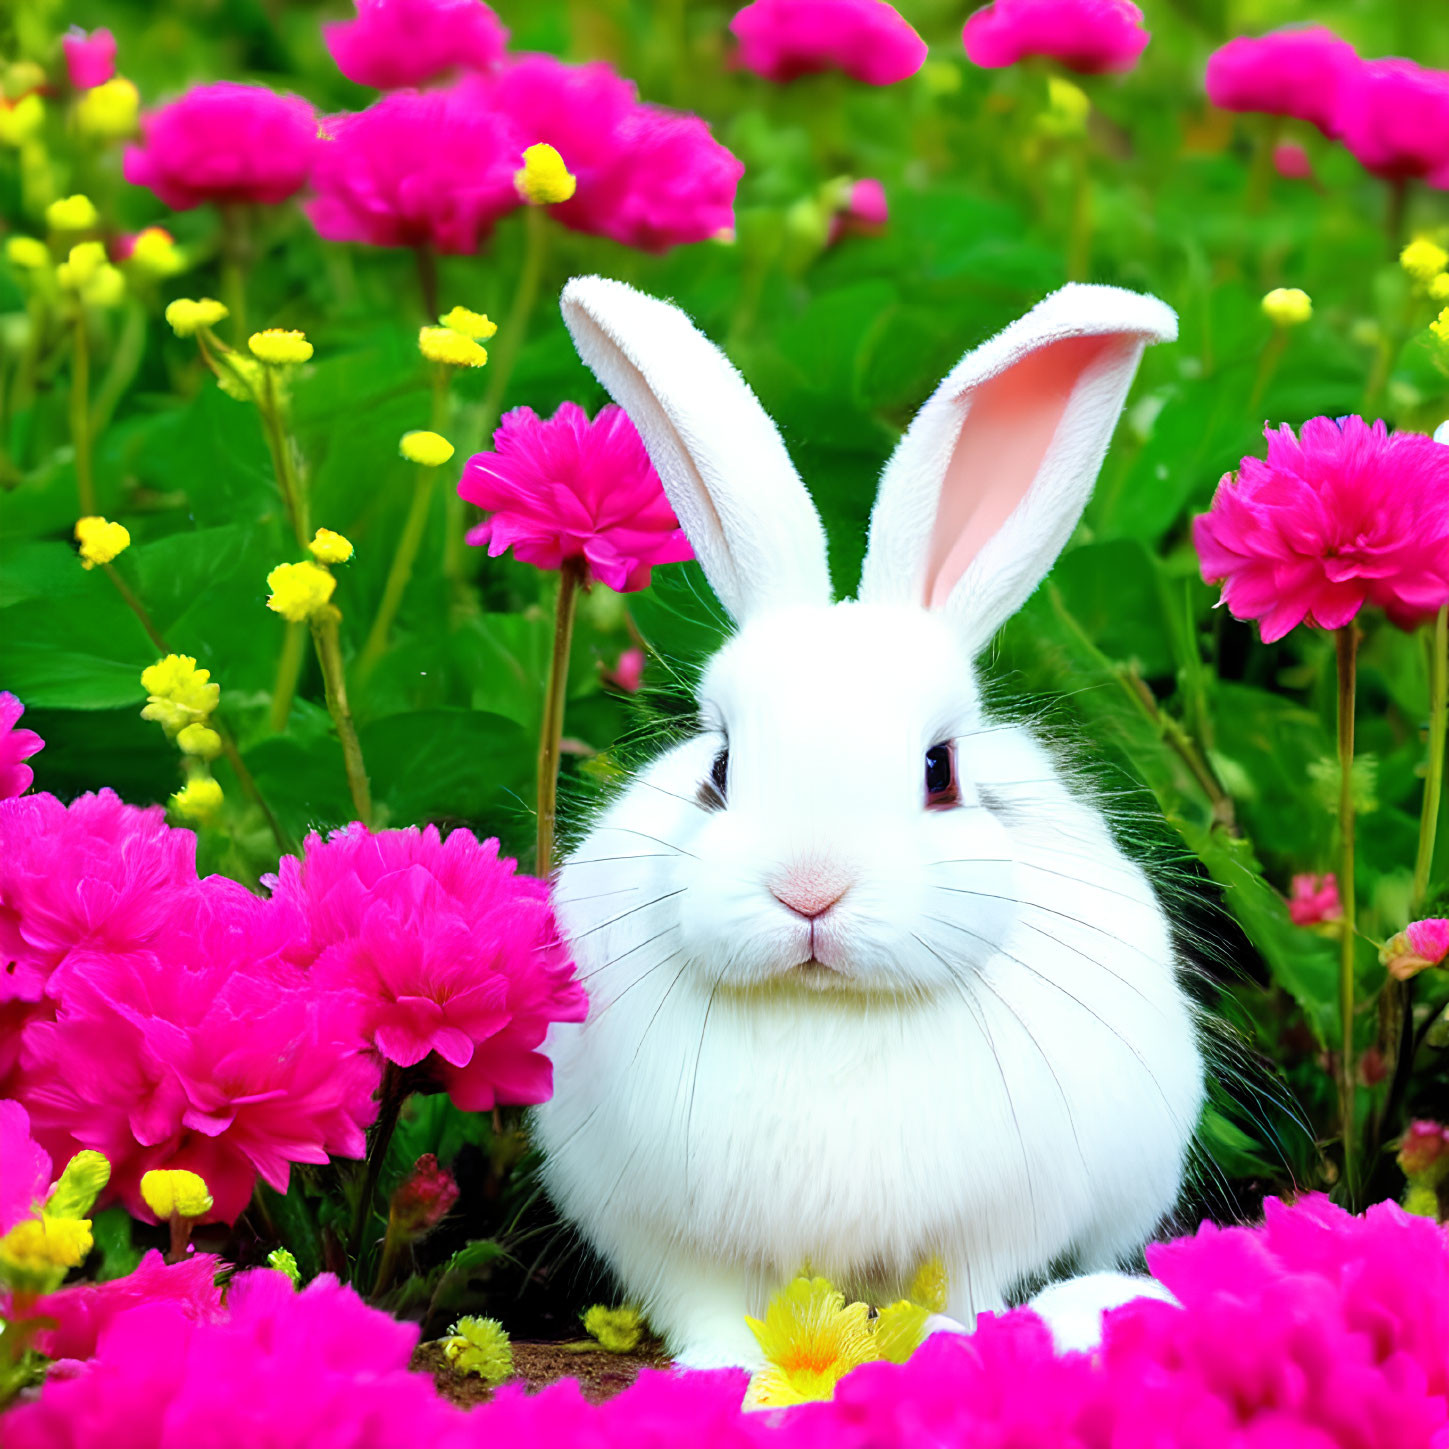 White Rabbit Among Pink and Yellow Flowers in Green Field